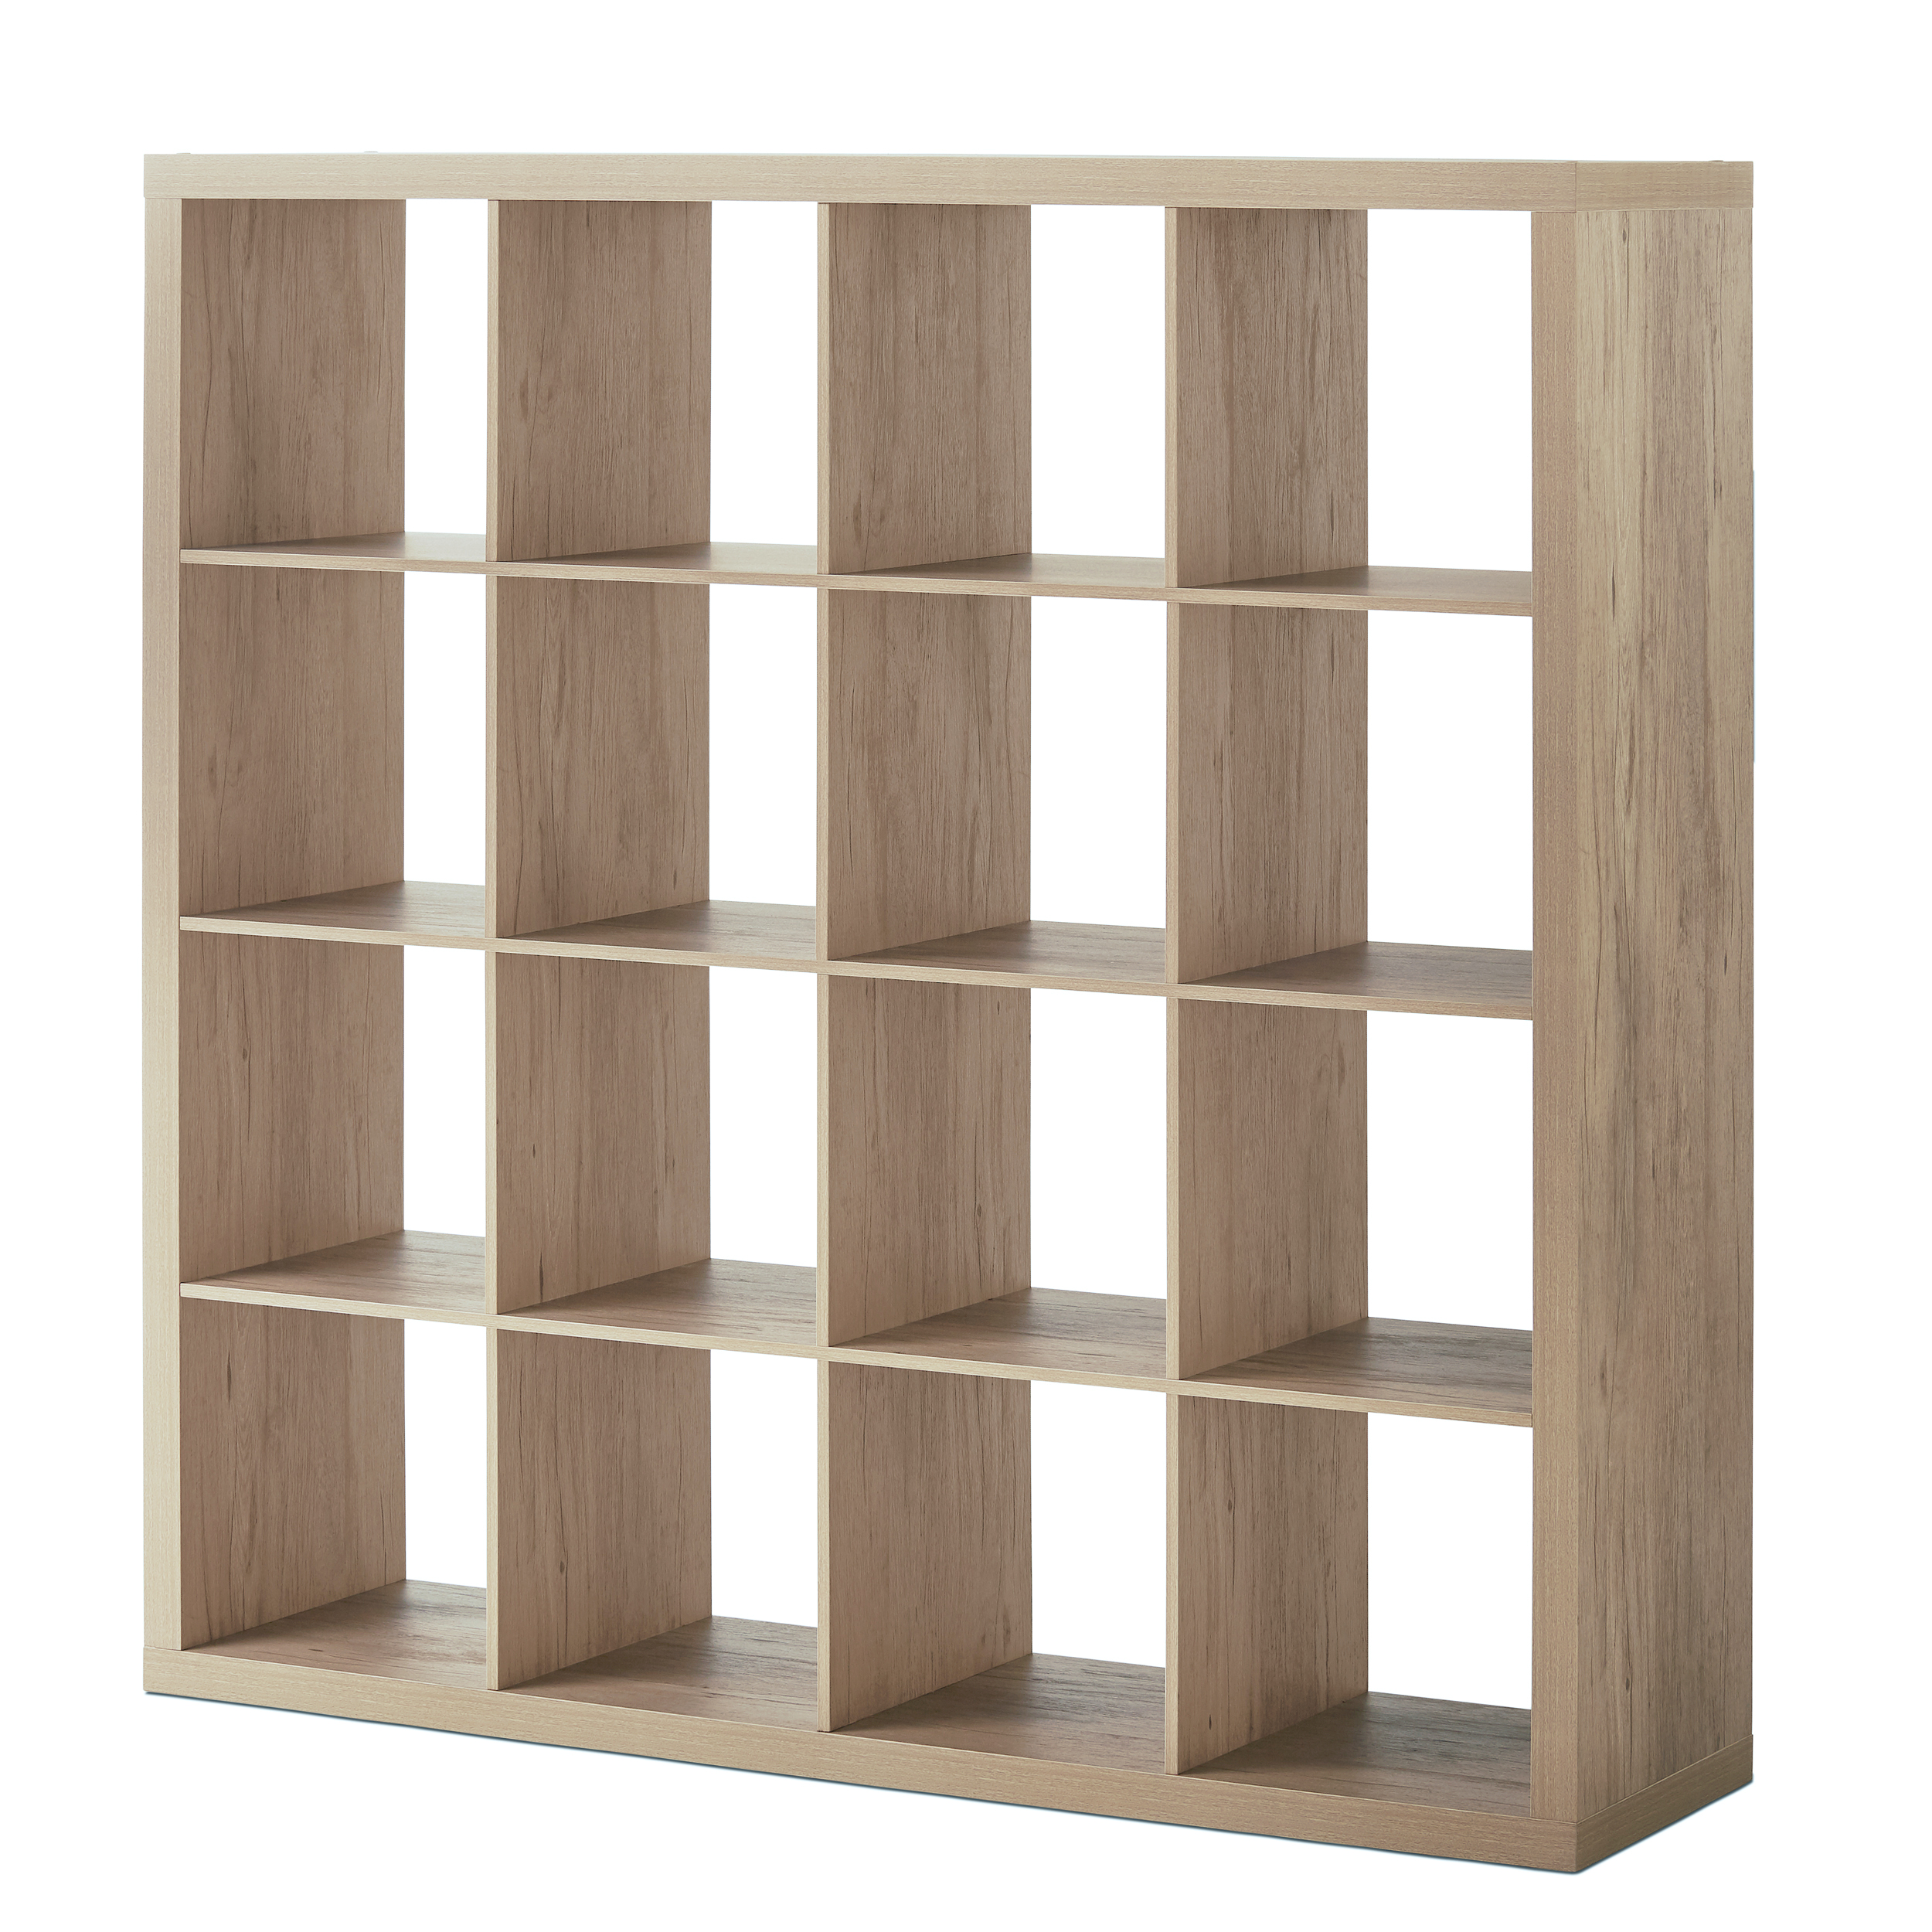 Better Homes & Gardens 16-Cube Storage Organizer, Natural - image 2 of 6